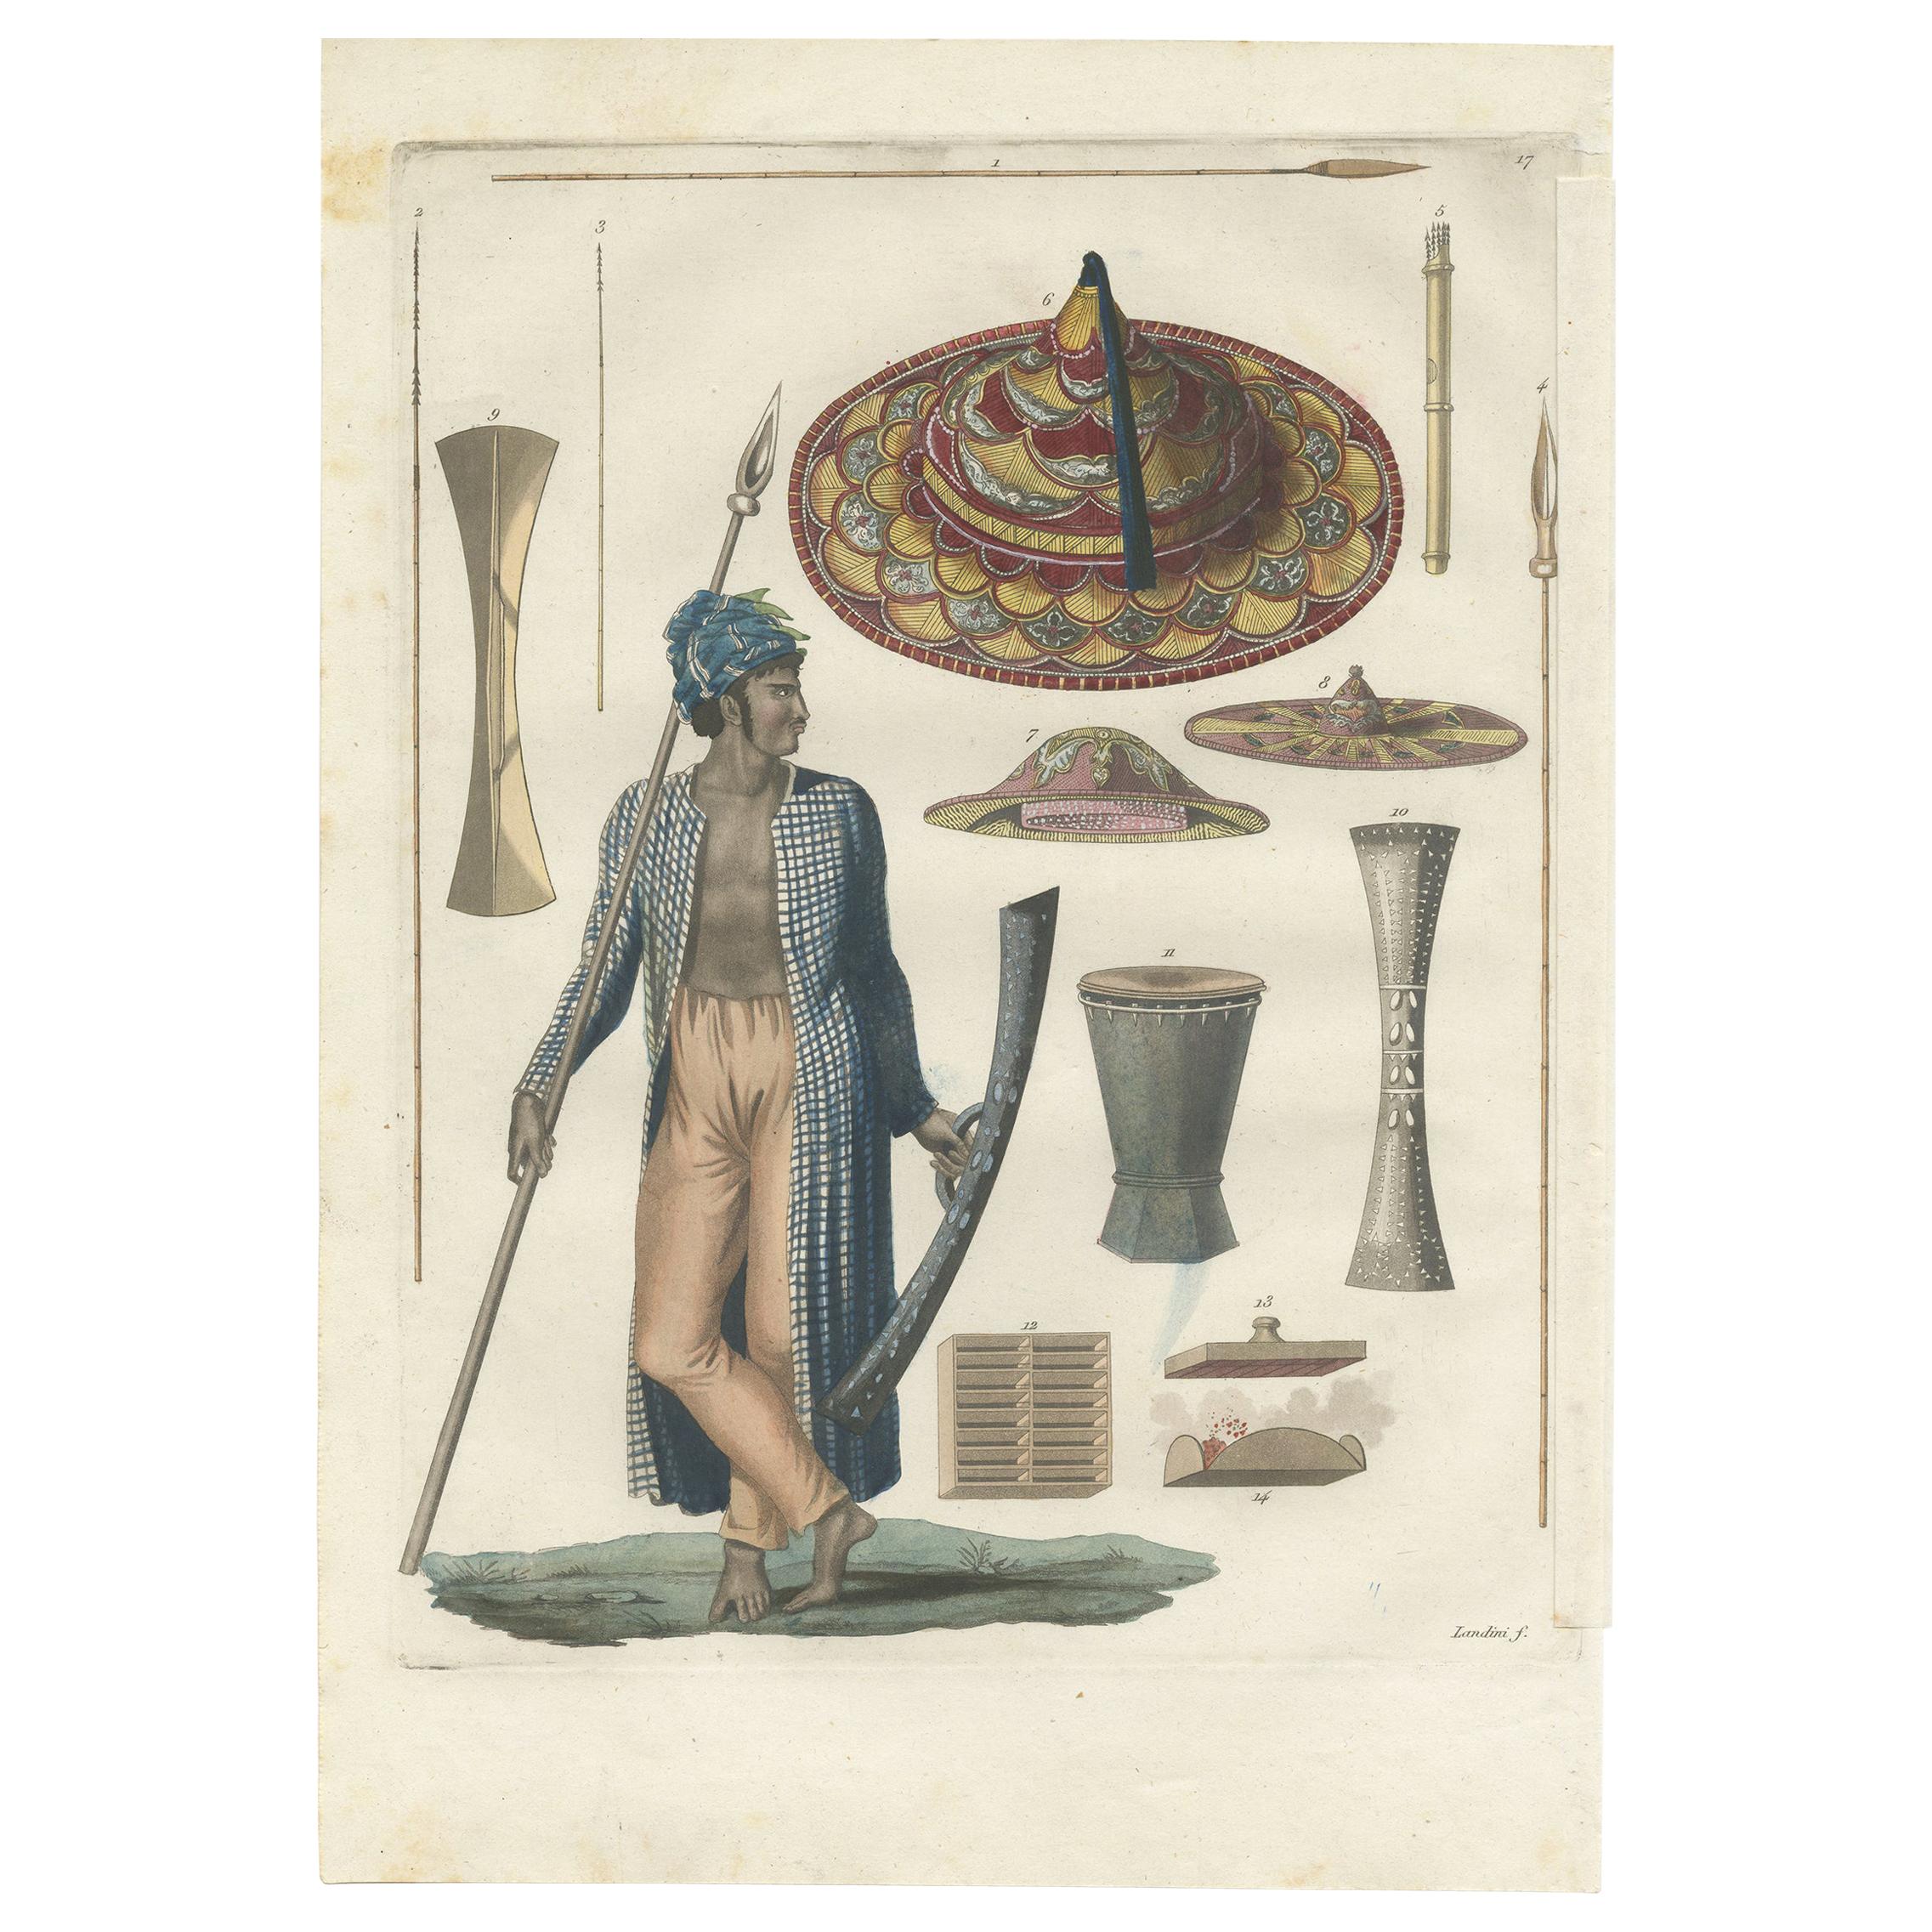 Antique Print of a Warrior and Weapons of Guébé Island by Ferrario '1831' For Sale